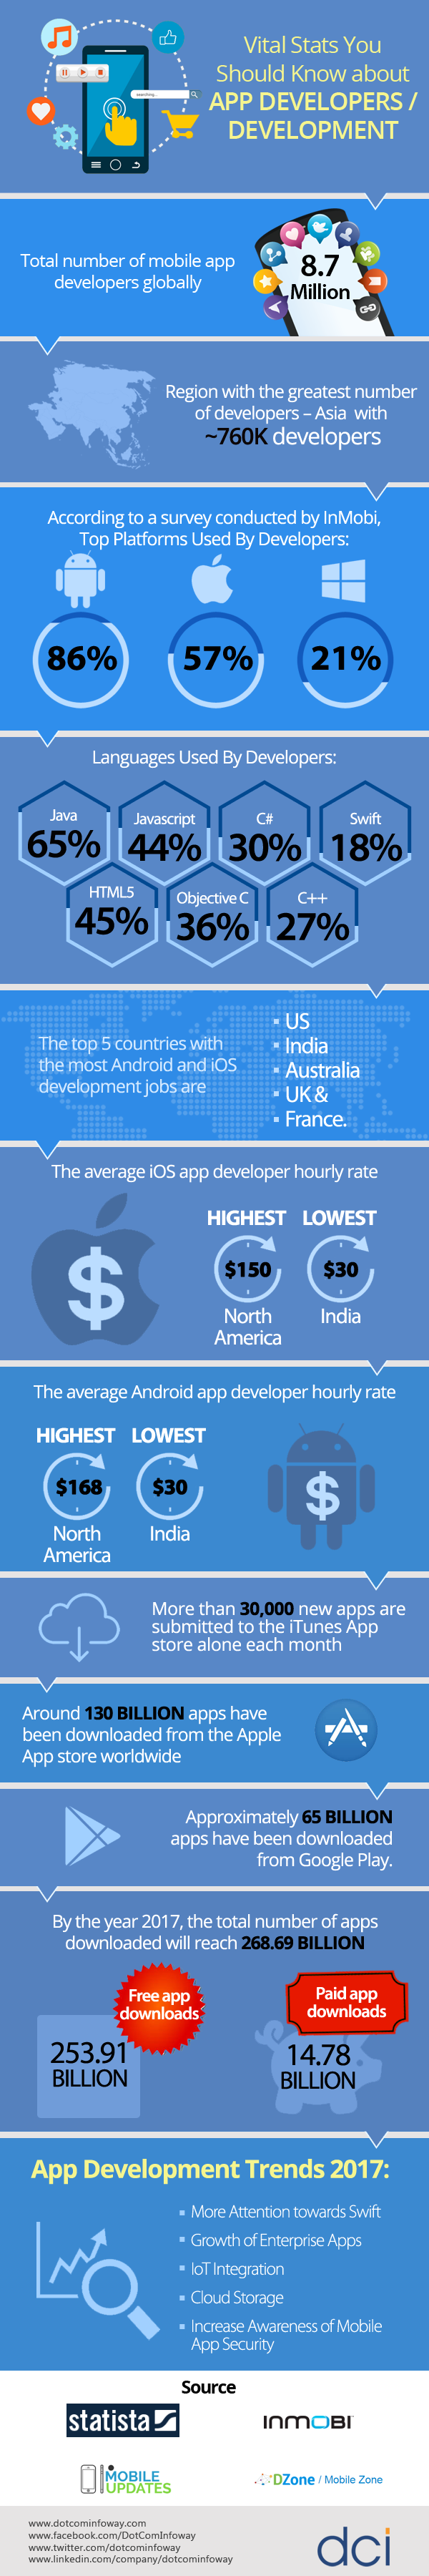 Vital Stats You Should Know about App Developers/Development 